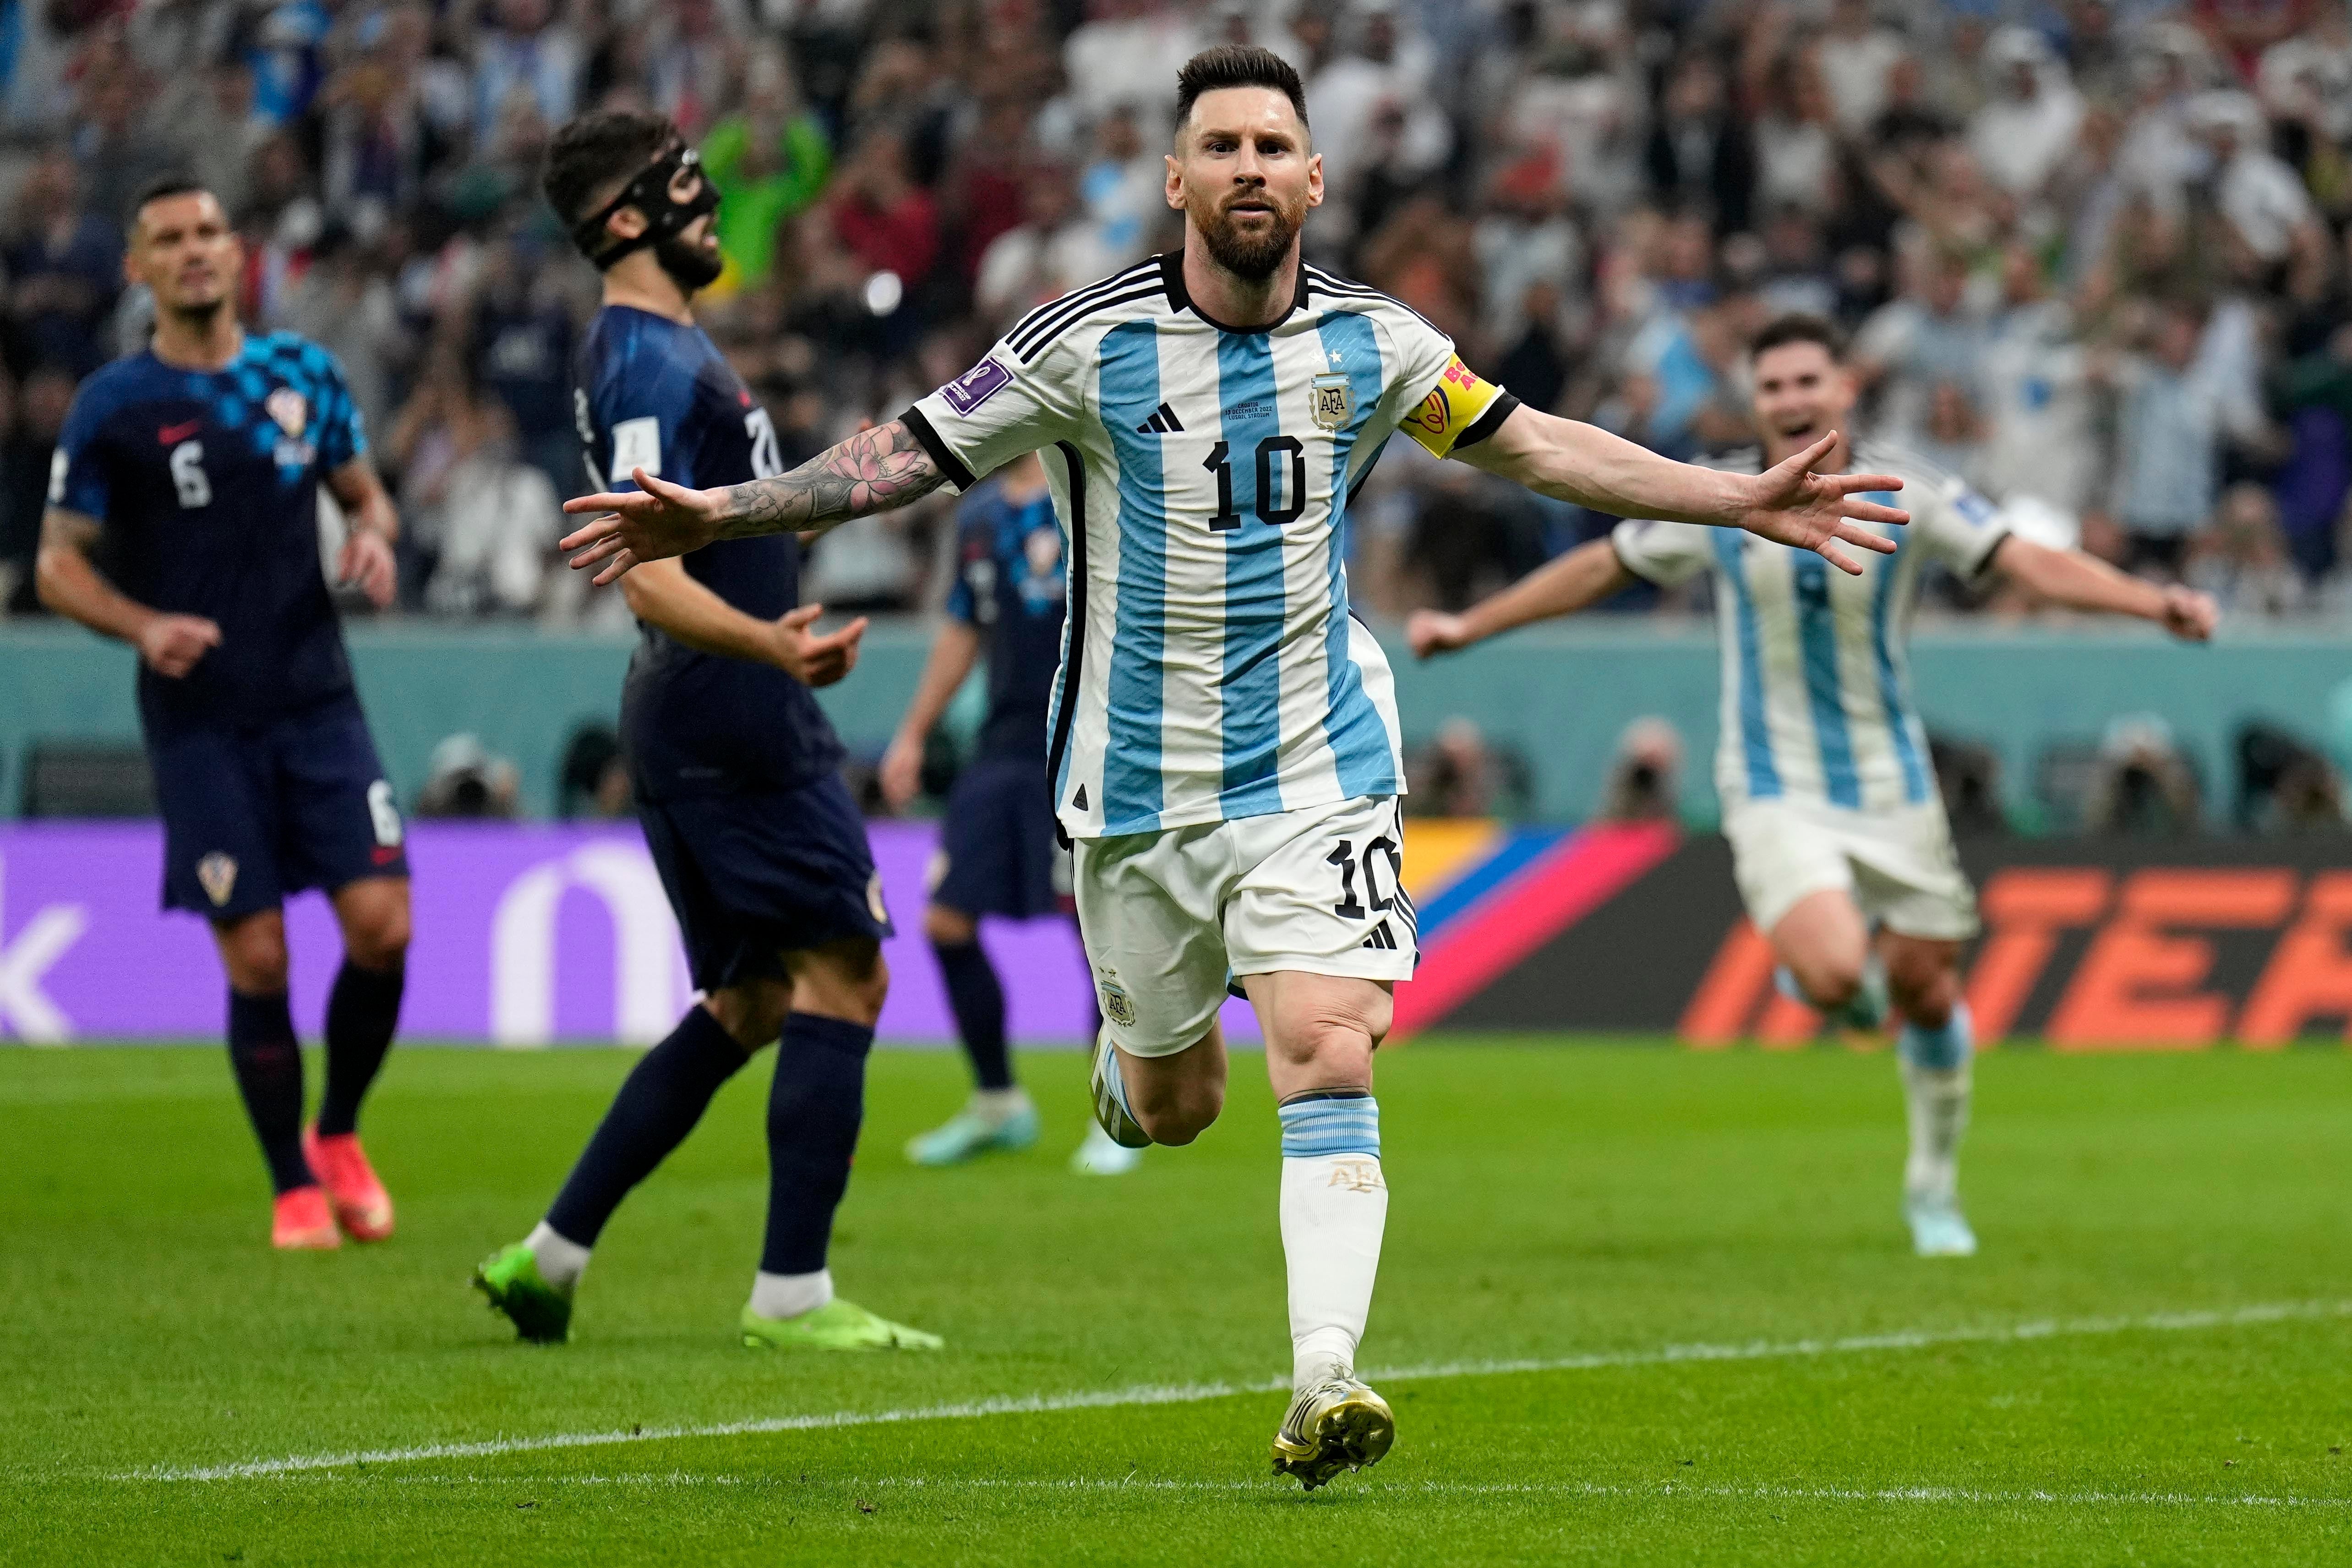 Lionel Messi, even at 35, has been pivotal to Argentina’s run to the final